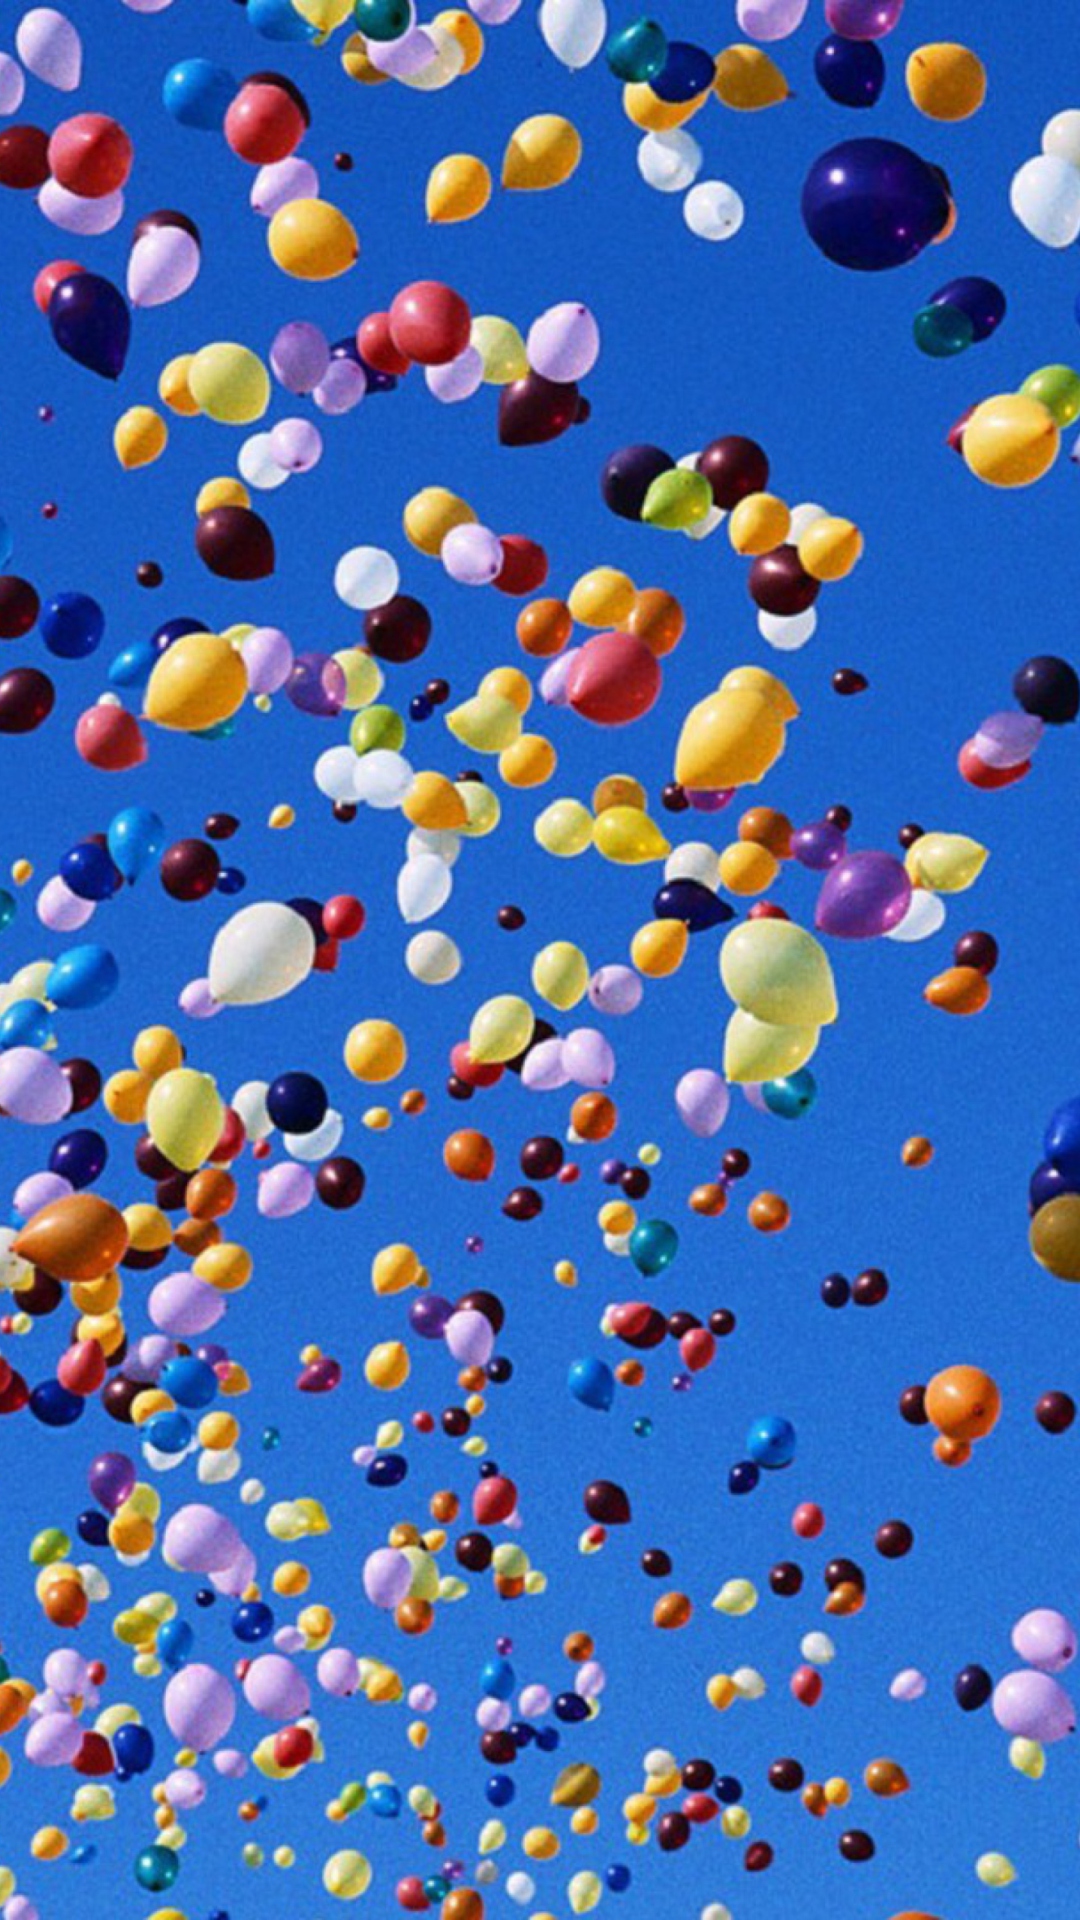 Colorful Balloons In Blue Sky screenshot #1 1080x1920